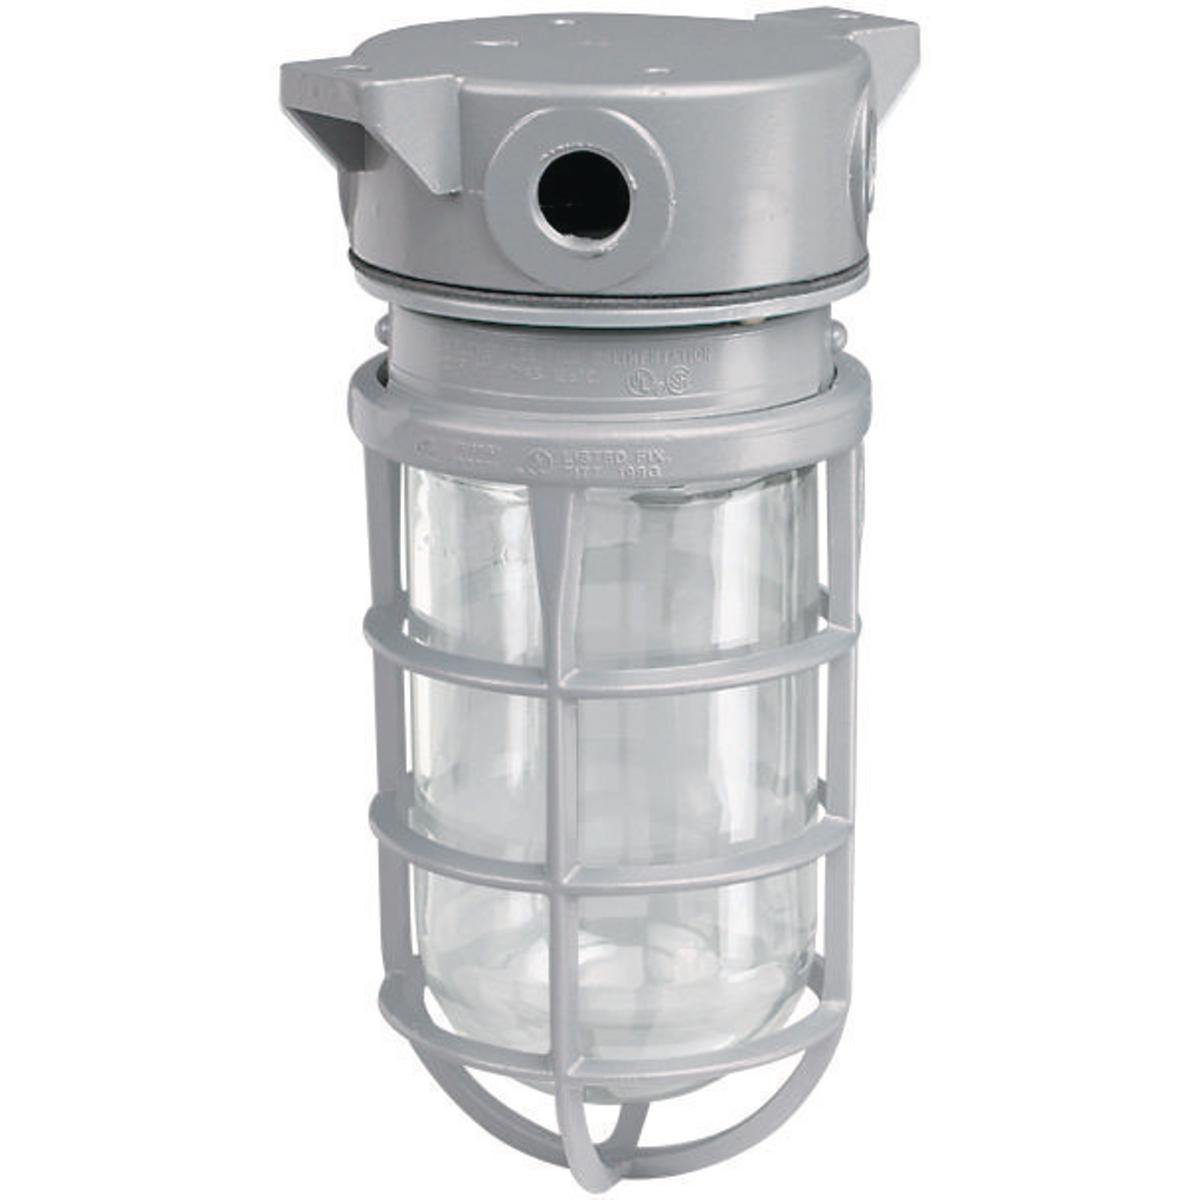 Hubbell VUXBGG-1-100 100W V Series Incandescent - Ceiling Fixture With Mounting Feet Using VBC Splice Box & VBA Adapter - 1/2" Hub with Guard  ; Electrostatically applied epoxy/polyester finish ; Modular design ; Hubs are threaded for attachment to conduit ; Set screws in pen